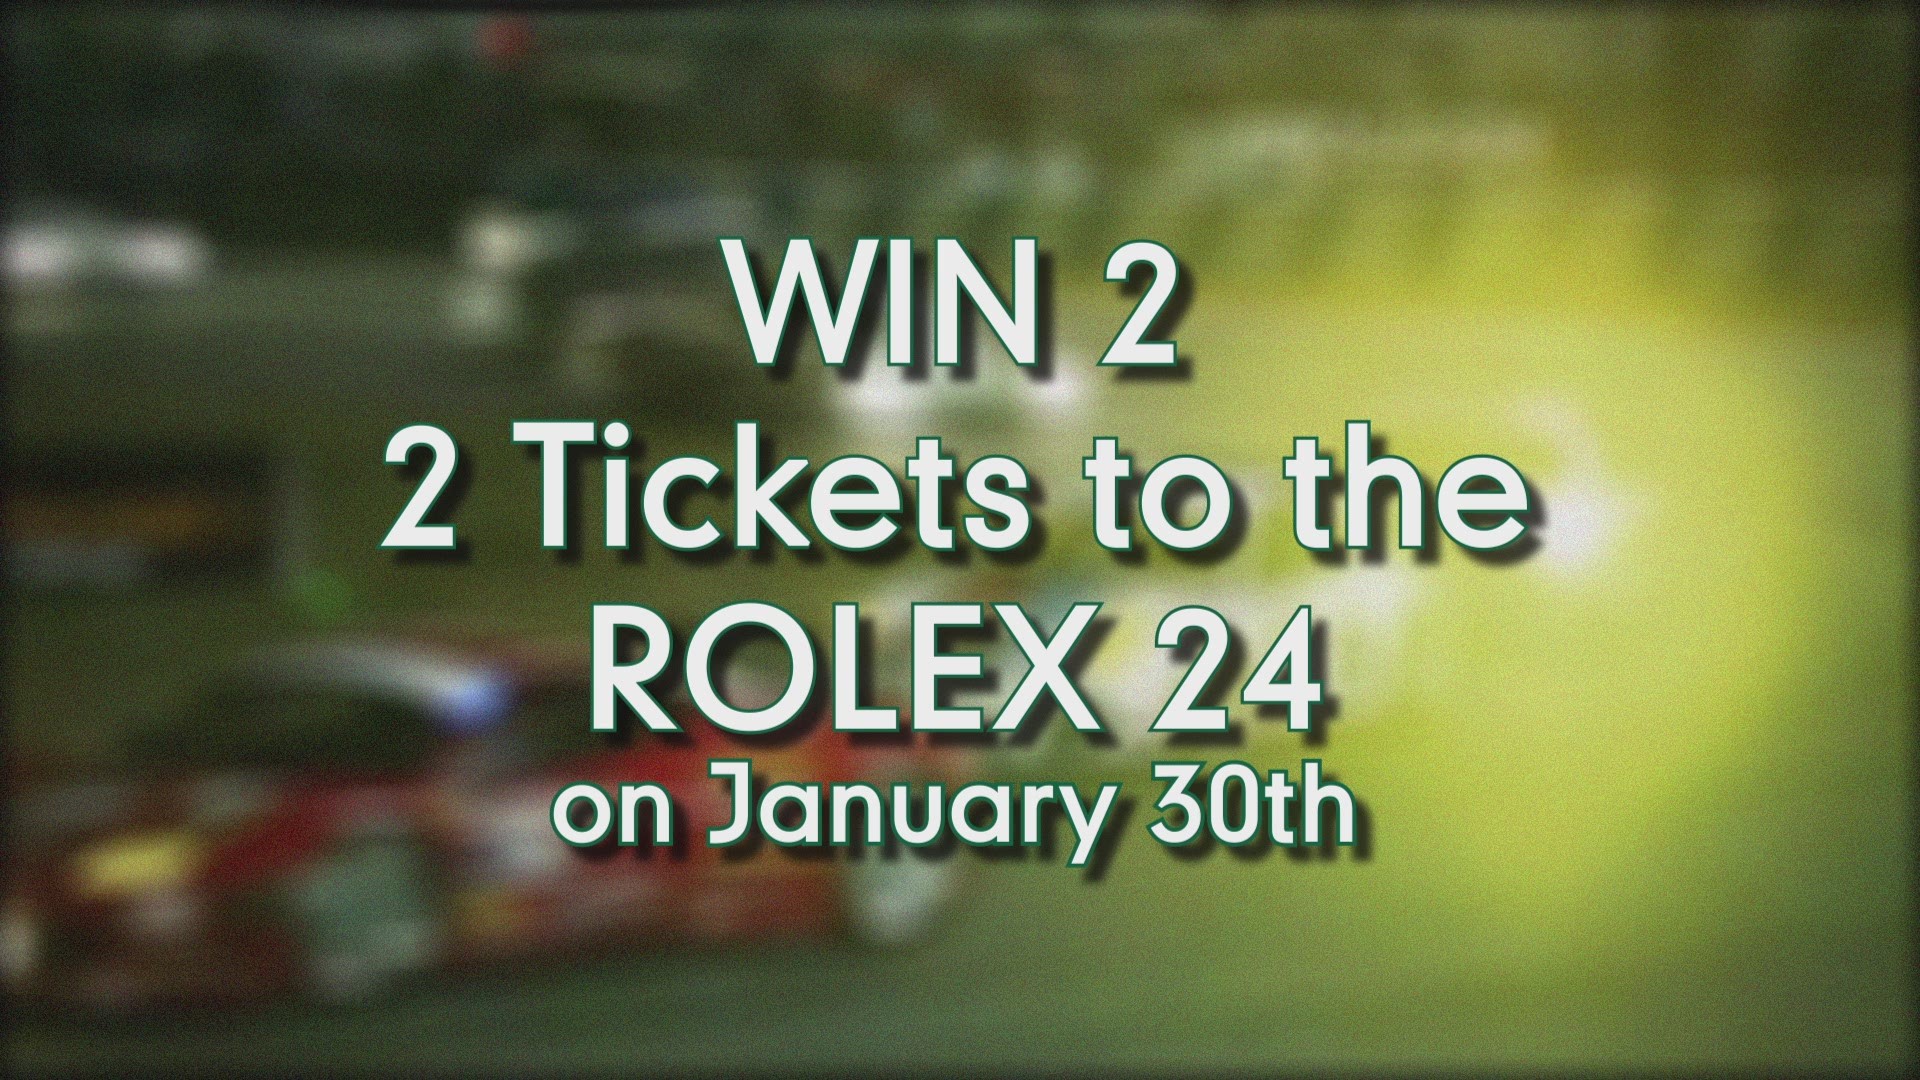 Enter to WIN tickets to the Rolex 24. Watch Sports Final Sunday after First Coast News at 11:00 to text the Word of the Day to 25543.